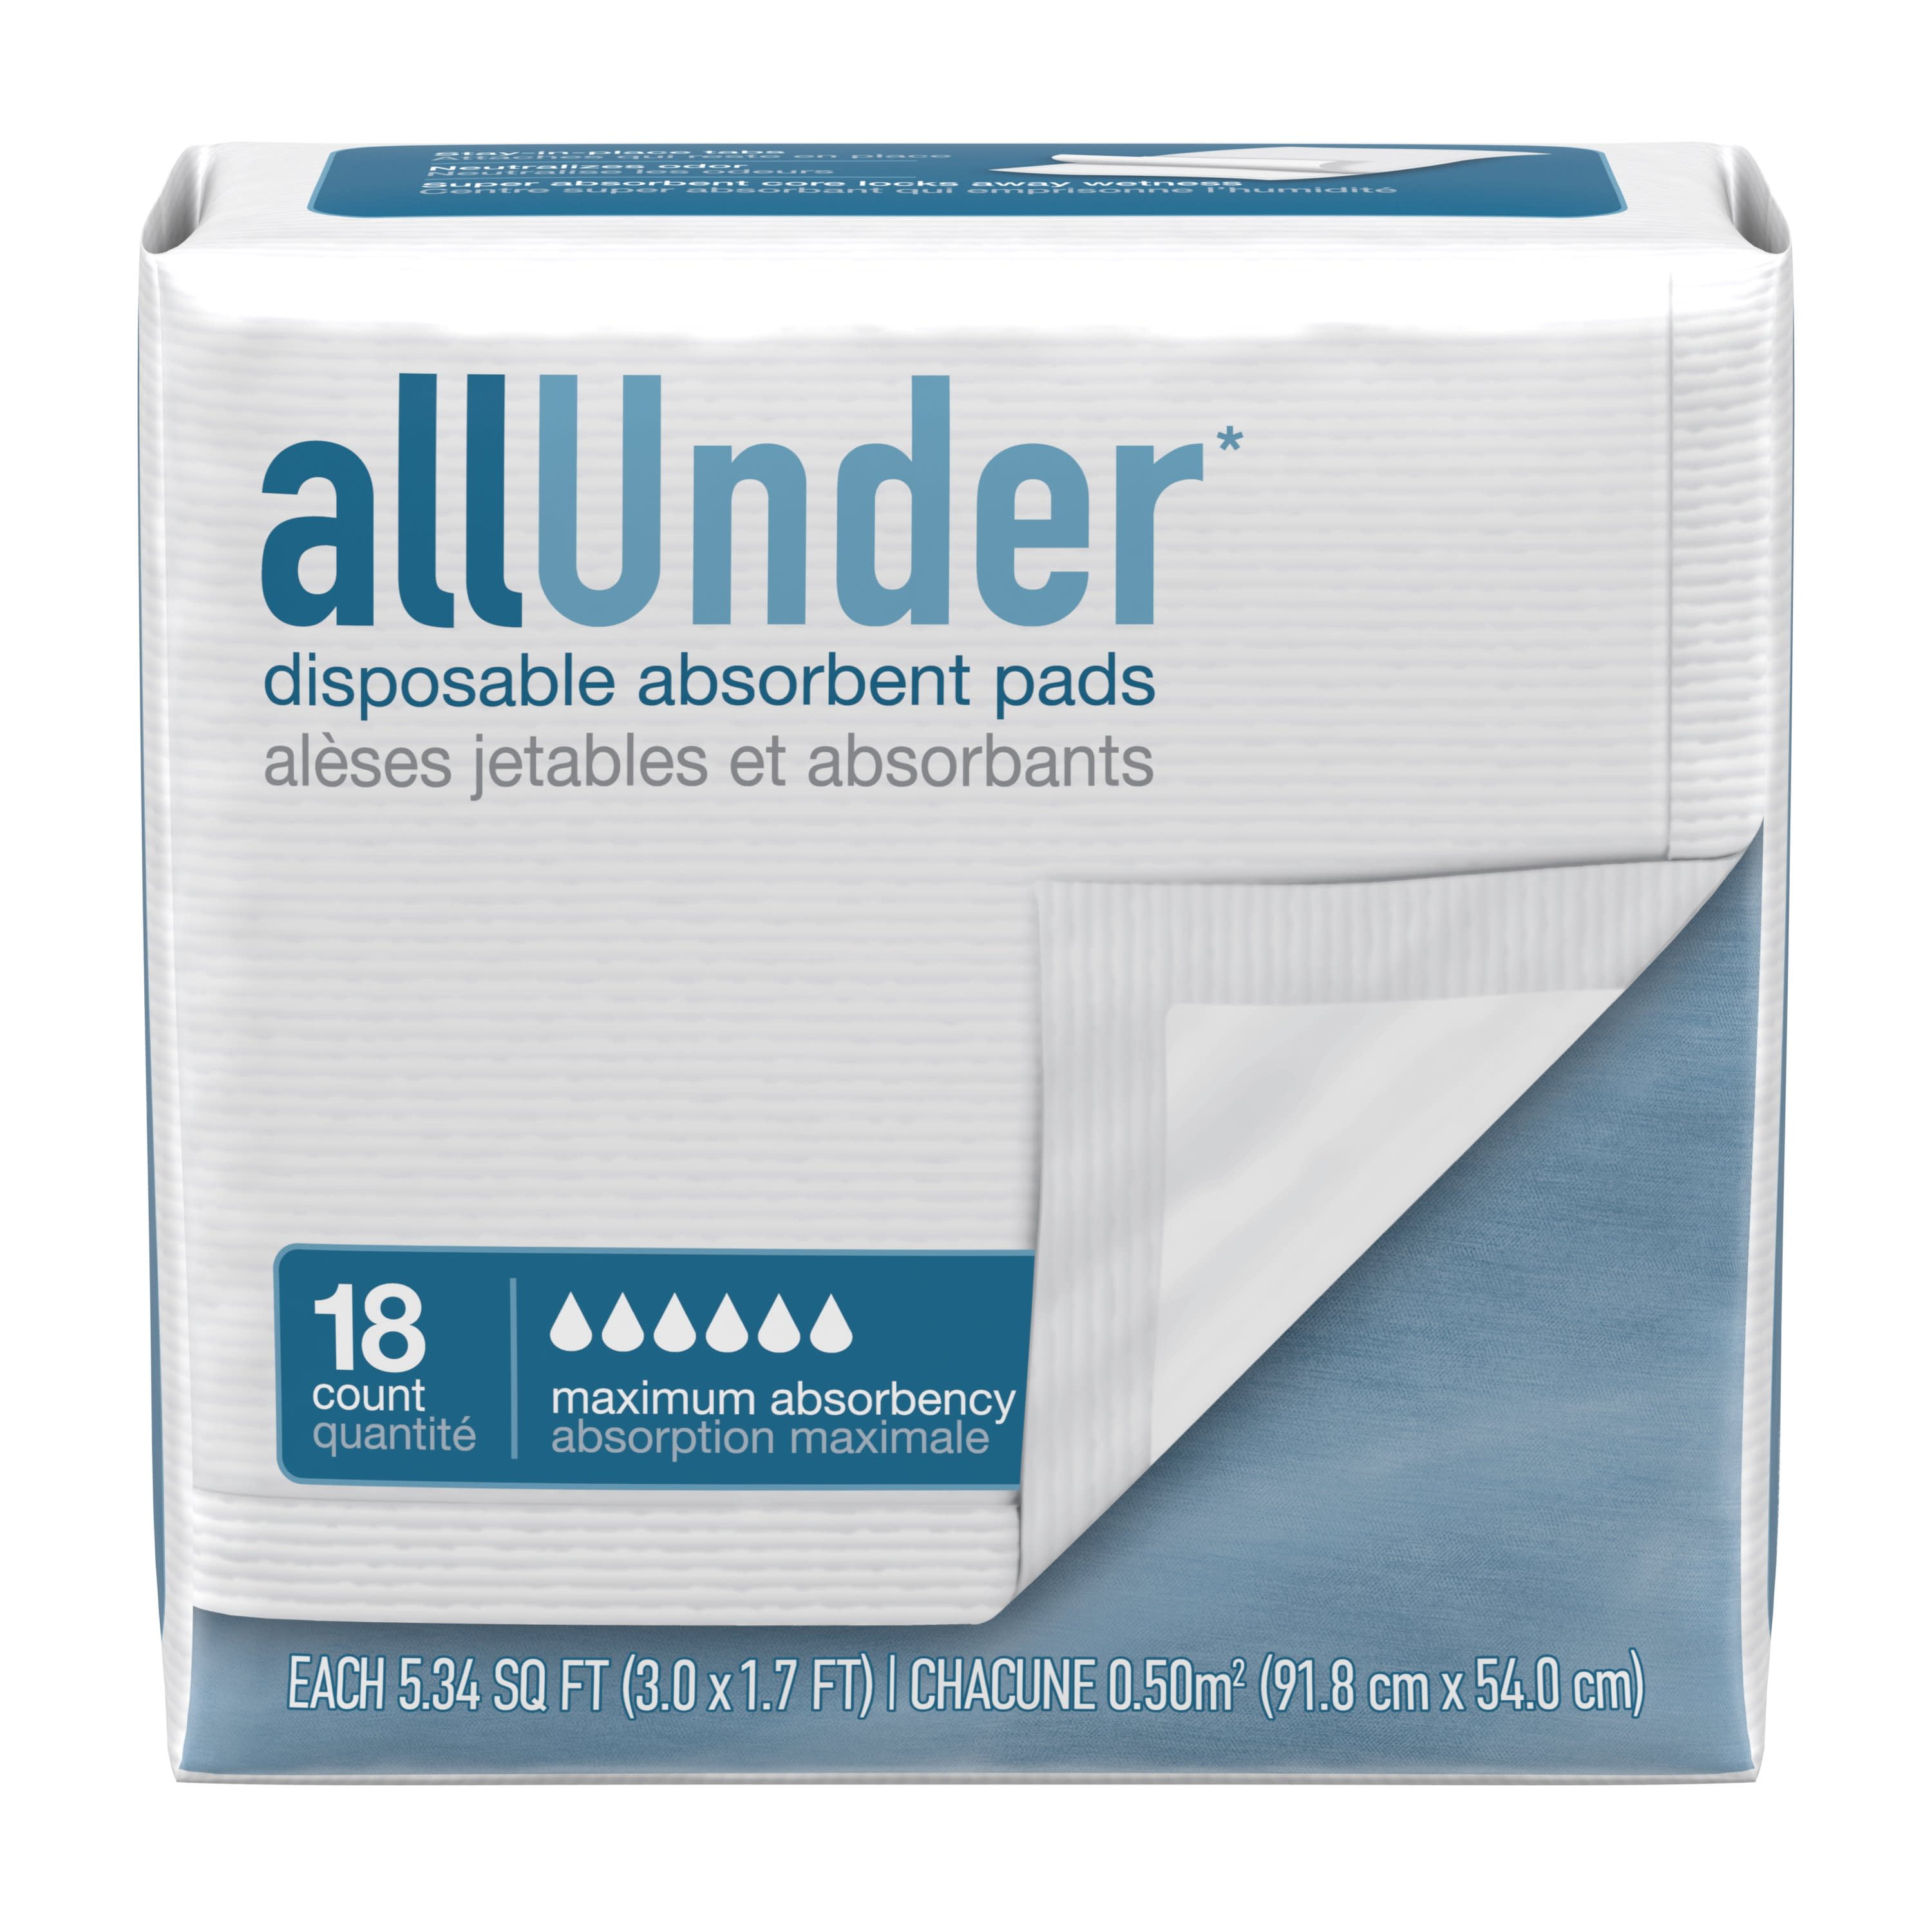 Tolobeve 23'' X 36'' Underpads Incontinence Bed Pads Disposable 60 Count  Chucks Pads, Pee Pads for Adults Baby Elderly, Chux Pads, Super Absorbent  Protection, Also as Puppy Pee Pad 